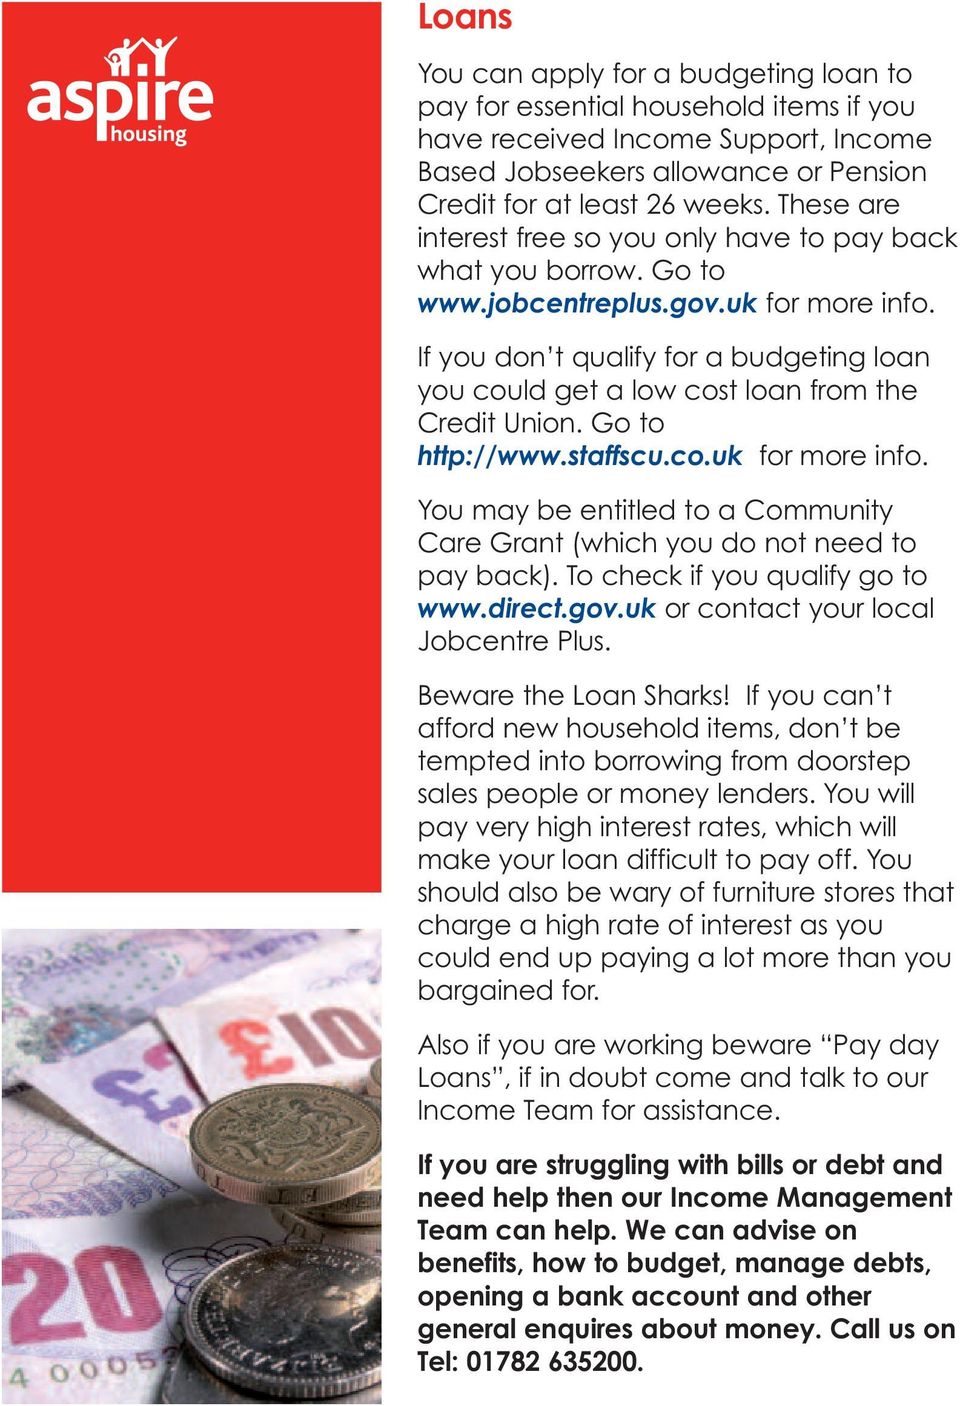 If you don t qualify for a budgeting loan you could get a low cost loan from the Credit Union. Go to http://www.staffscu.co.uk for more info.